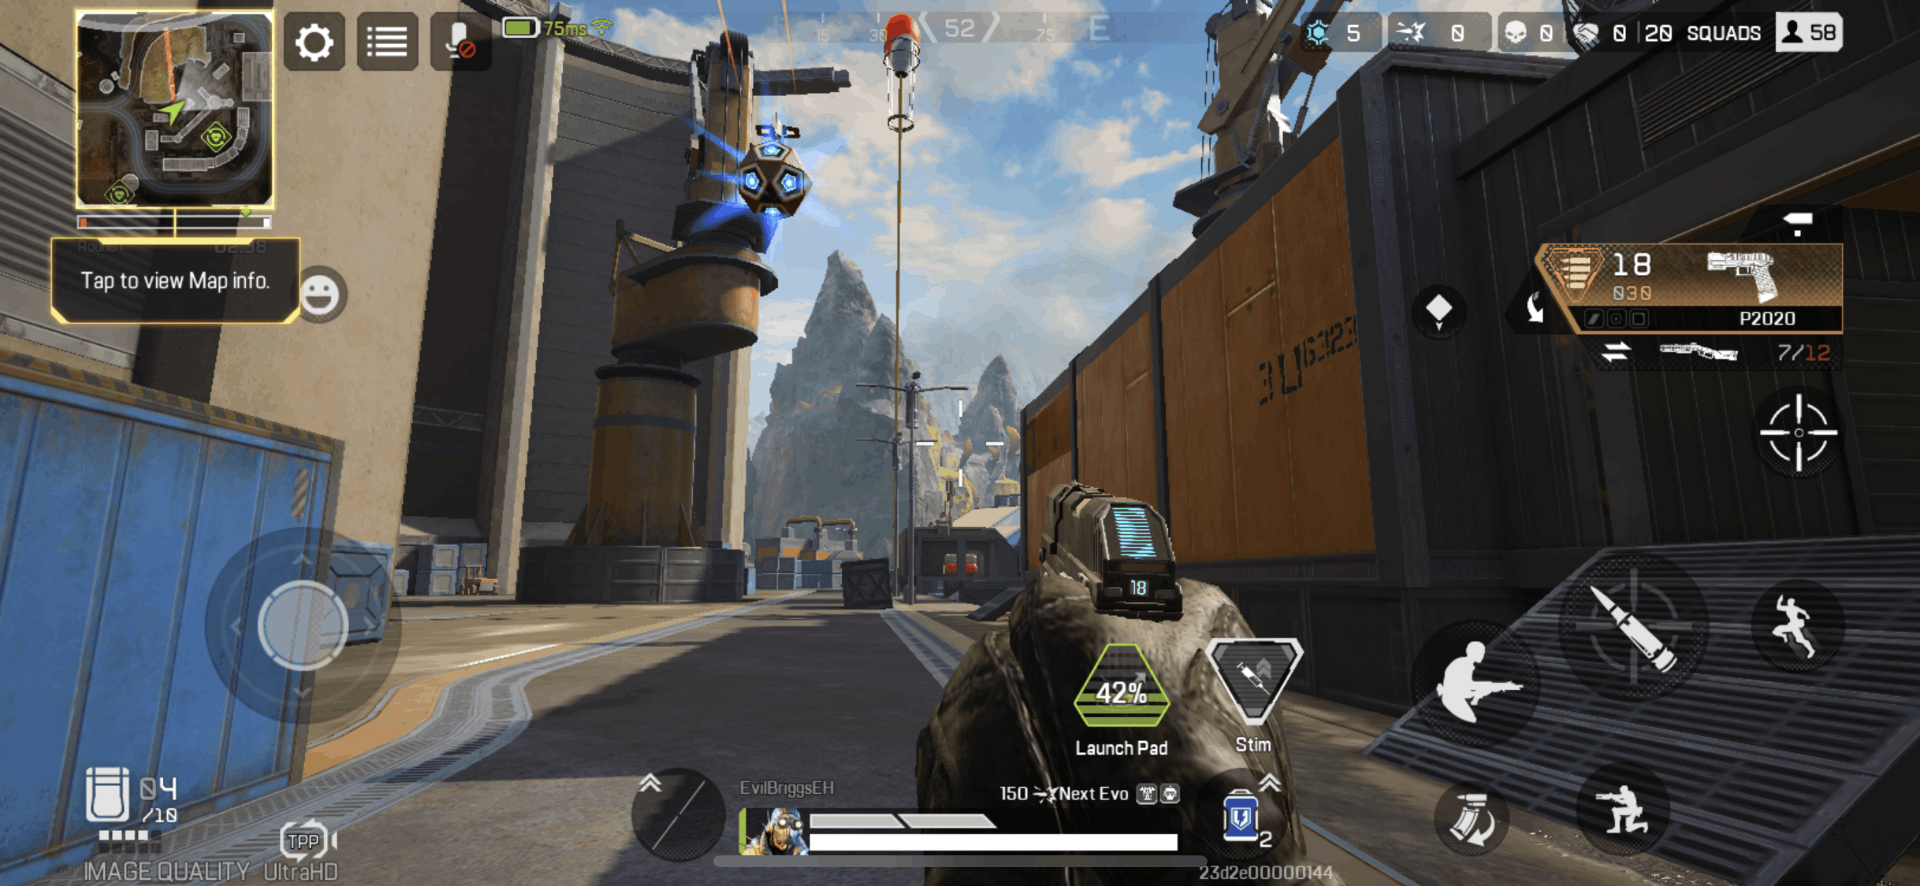 Apex Legends - Learn How to Get Free Coins